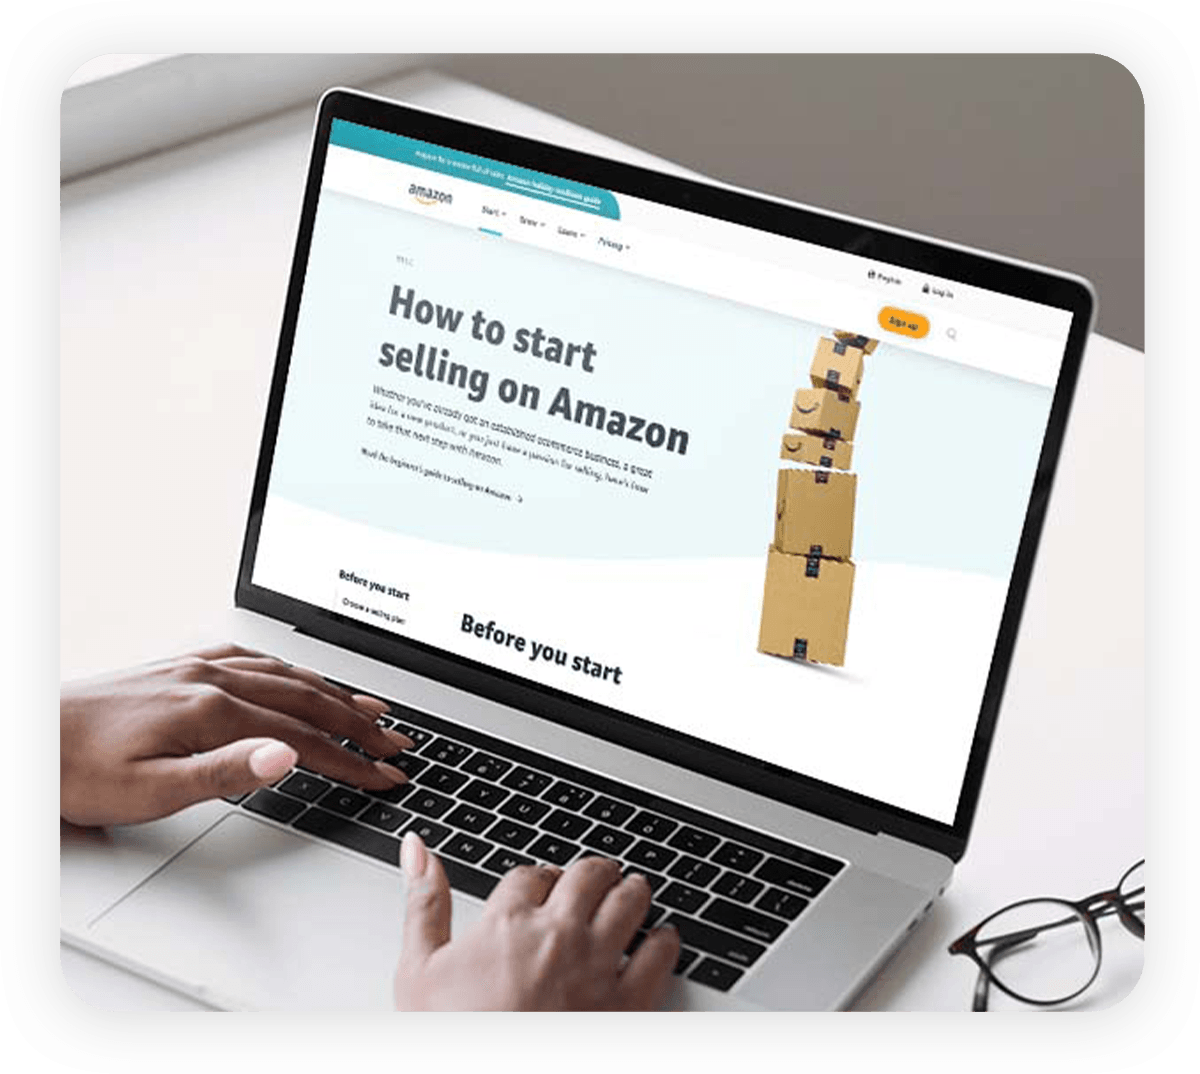 Outsourcing Amazon A+ Content Services